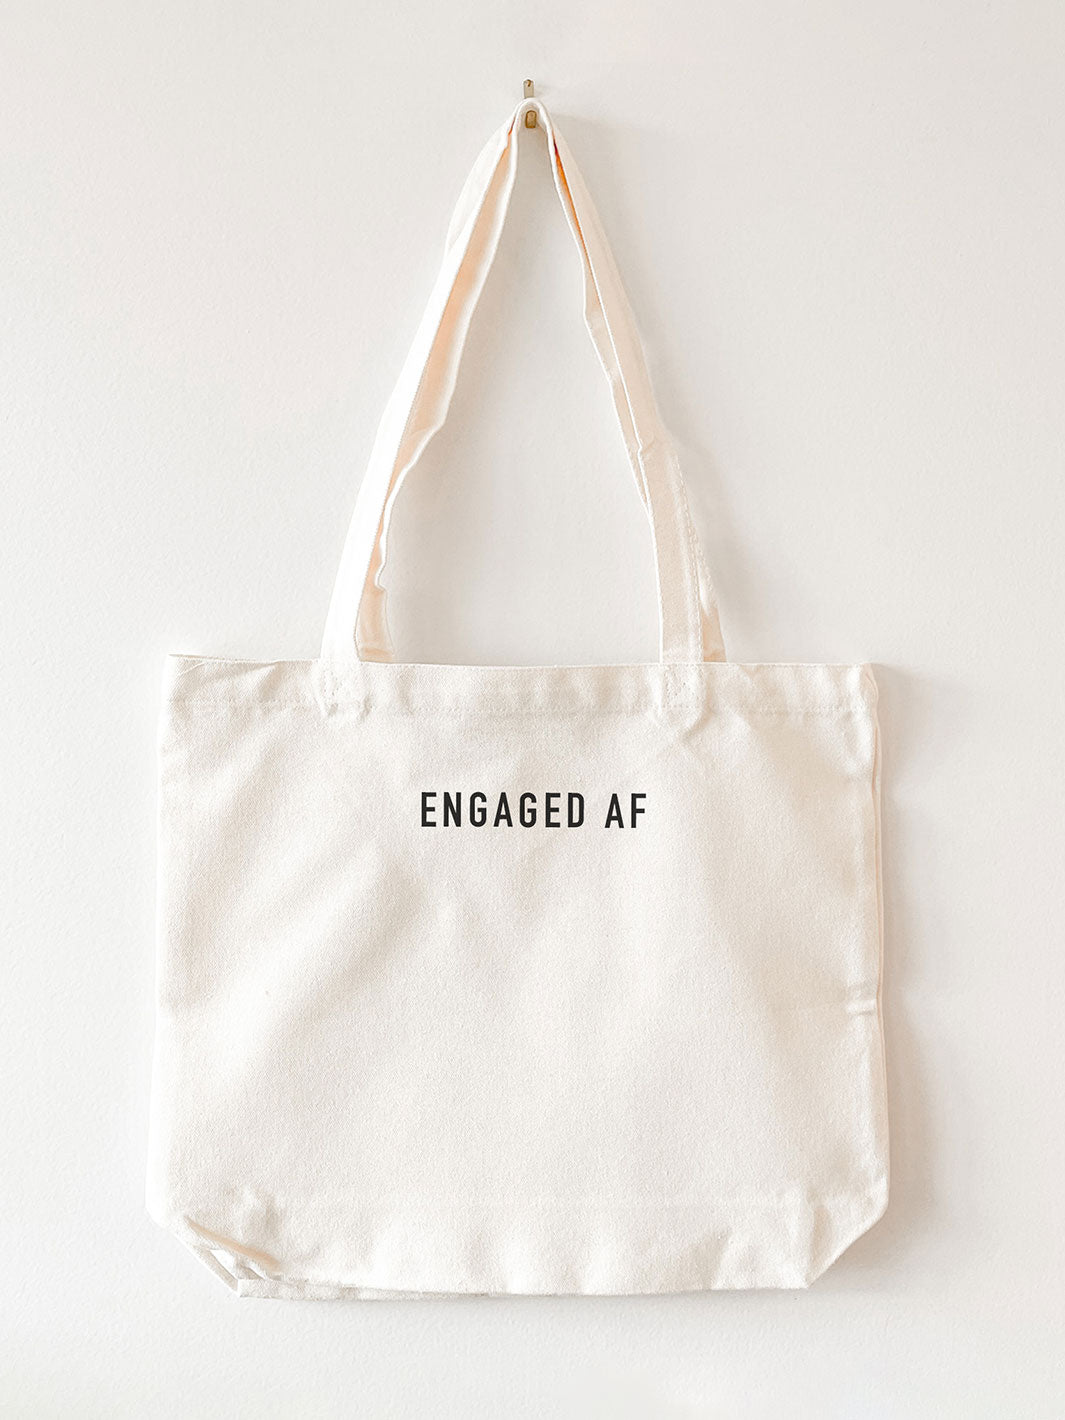 Bride To Be Tote Bag